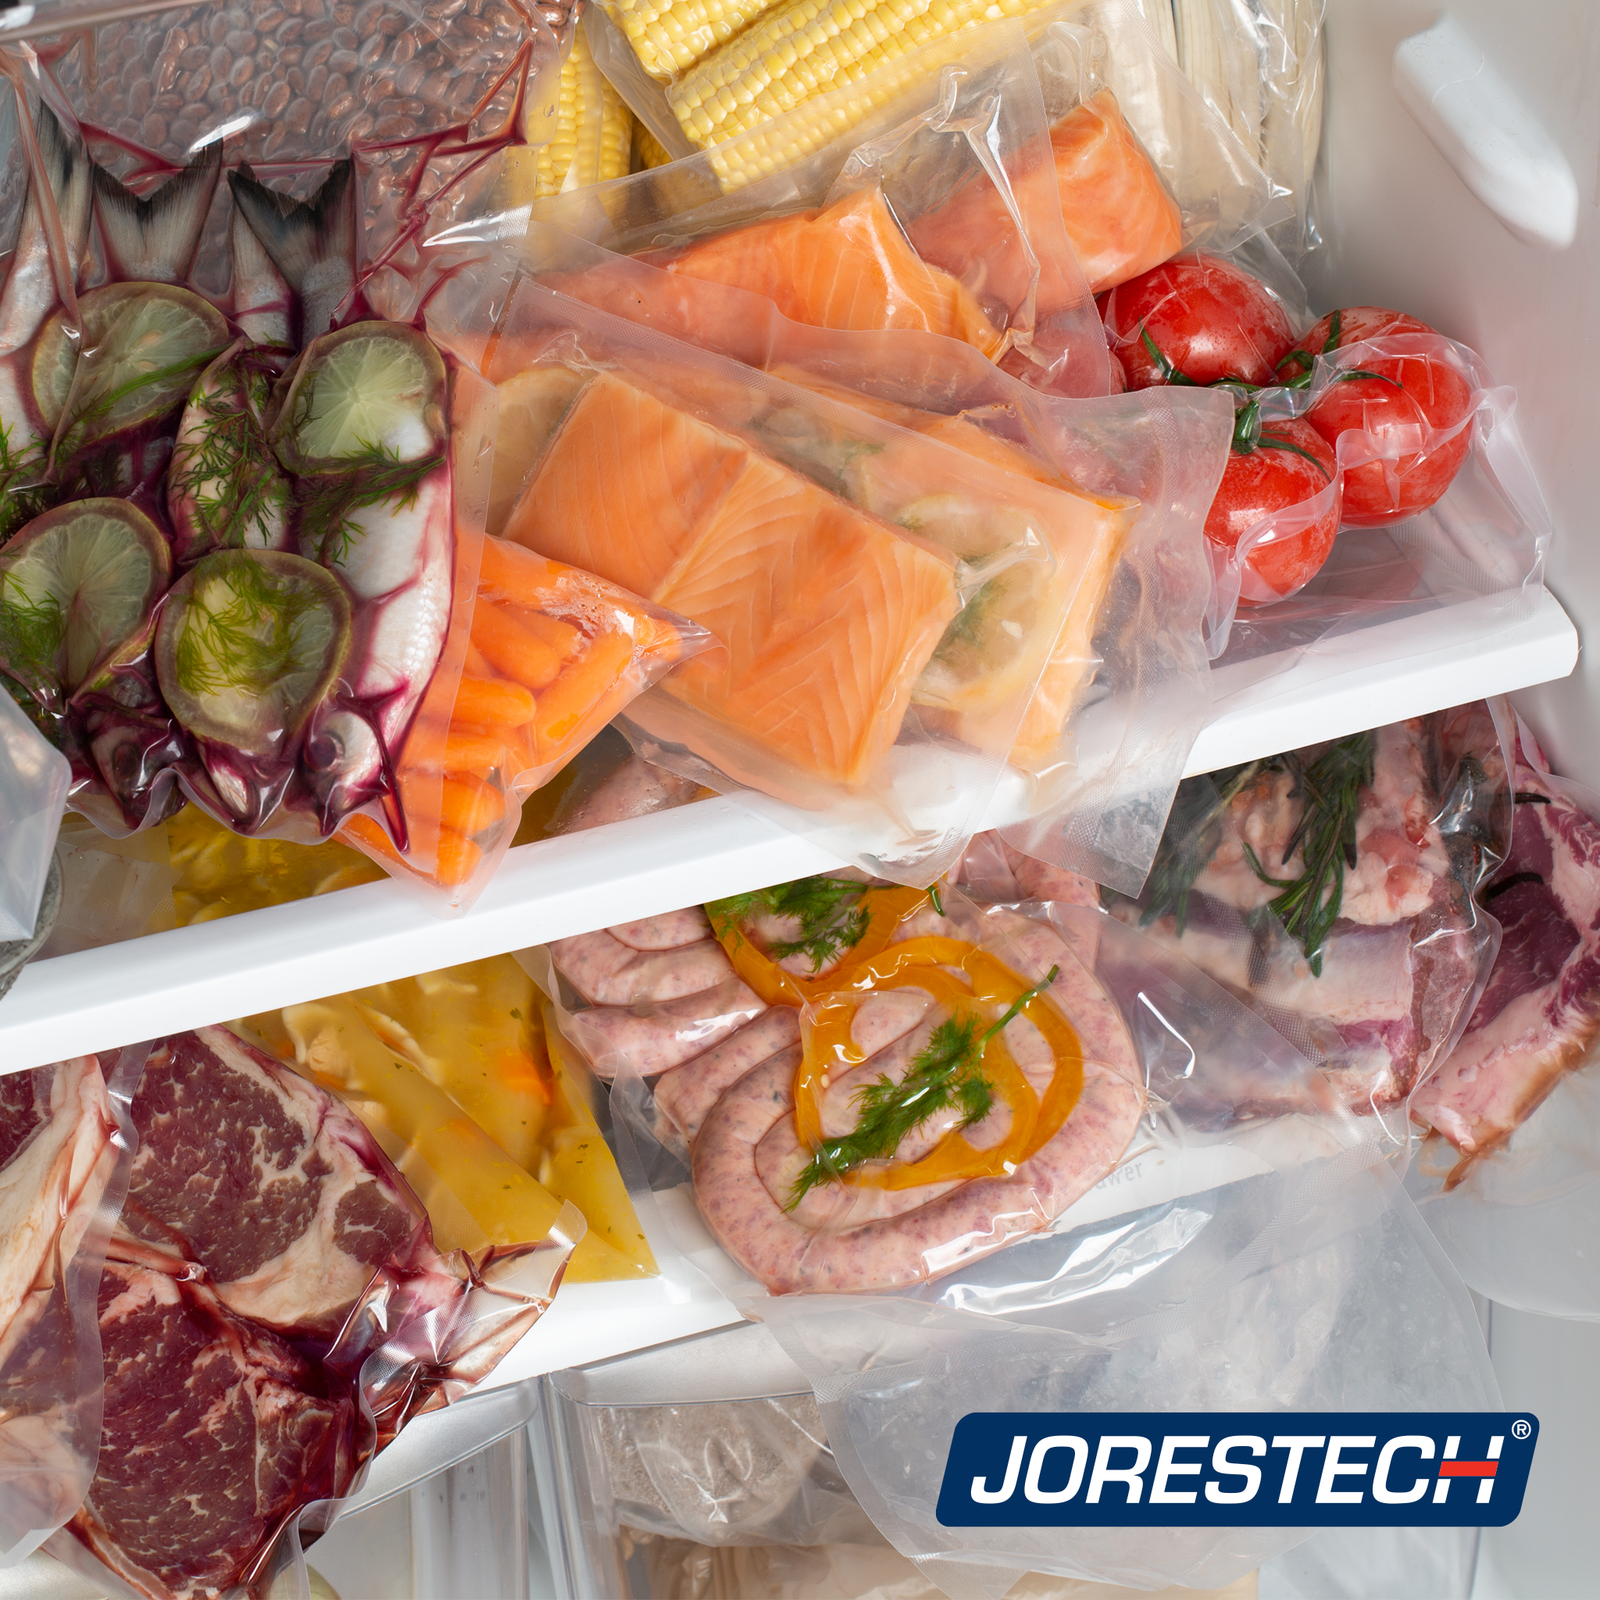  Freezer with a large variety of product vacuumed with a stainless steel JORESTECH vacuum sealer. Some of the products are: meat, fish, sausages, vegetables and soup